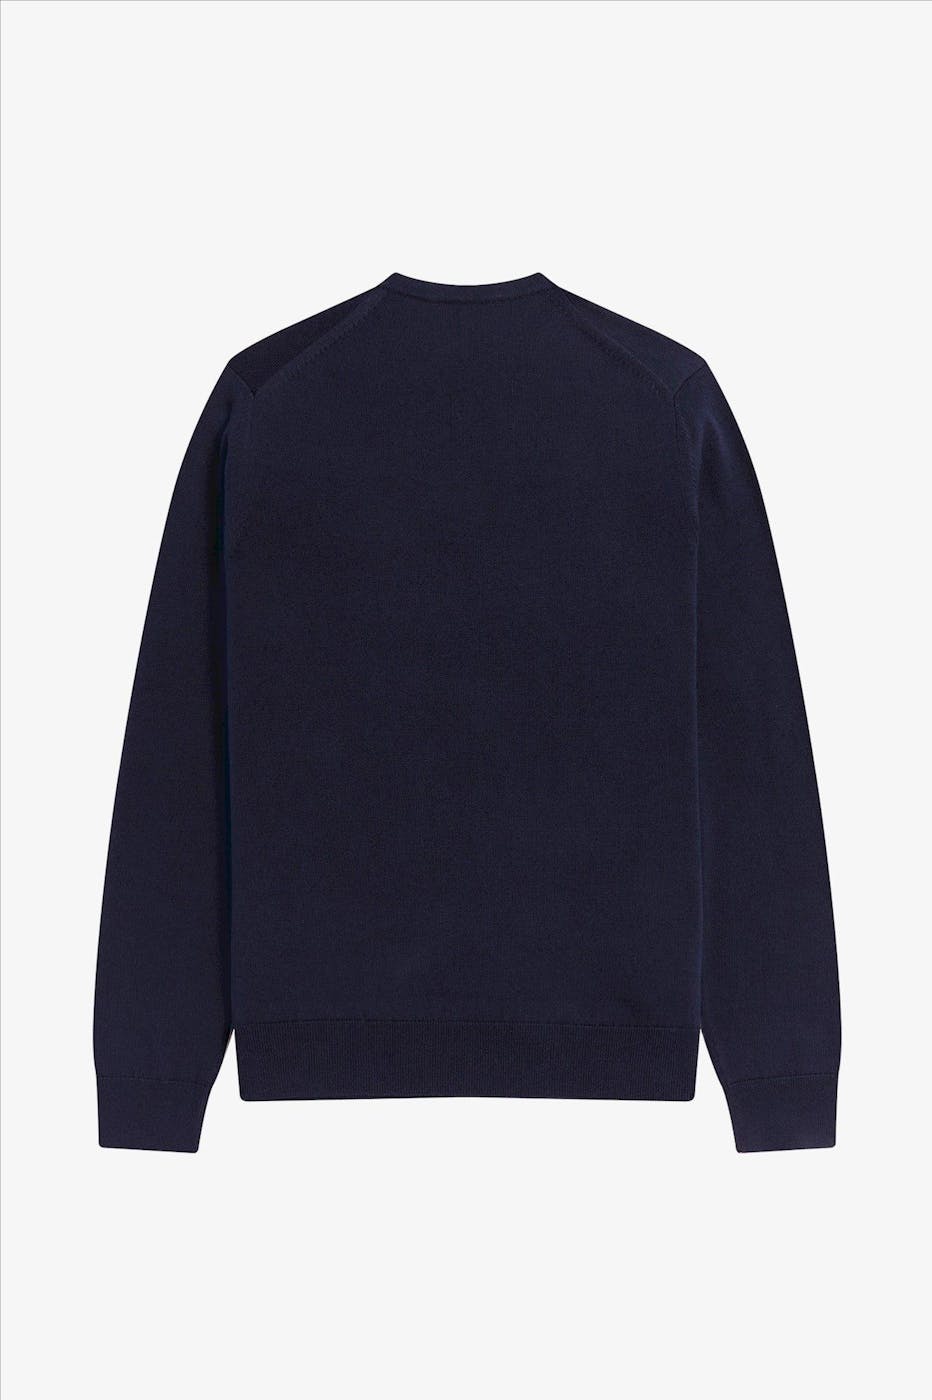 Fred Perry - Donkerblauwe Classic Crew Neck trui